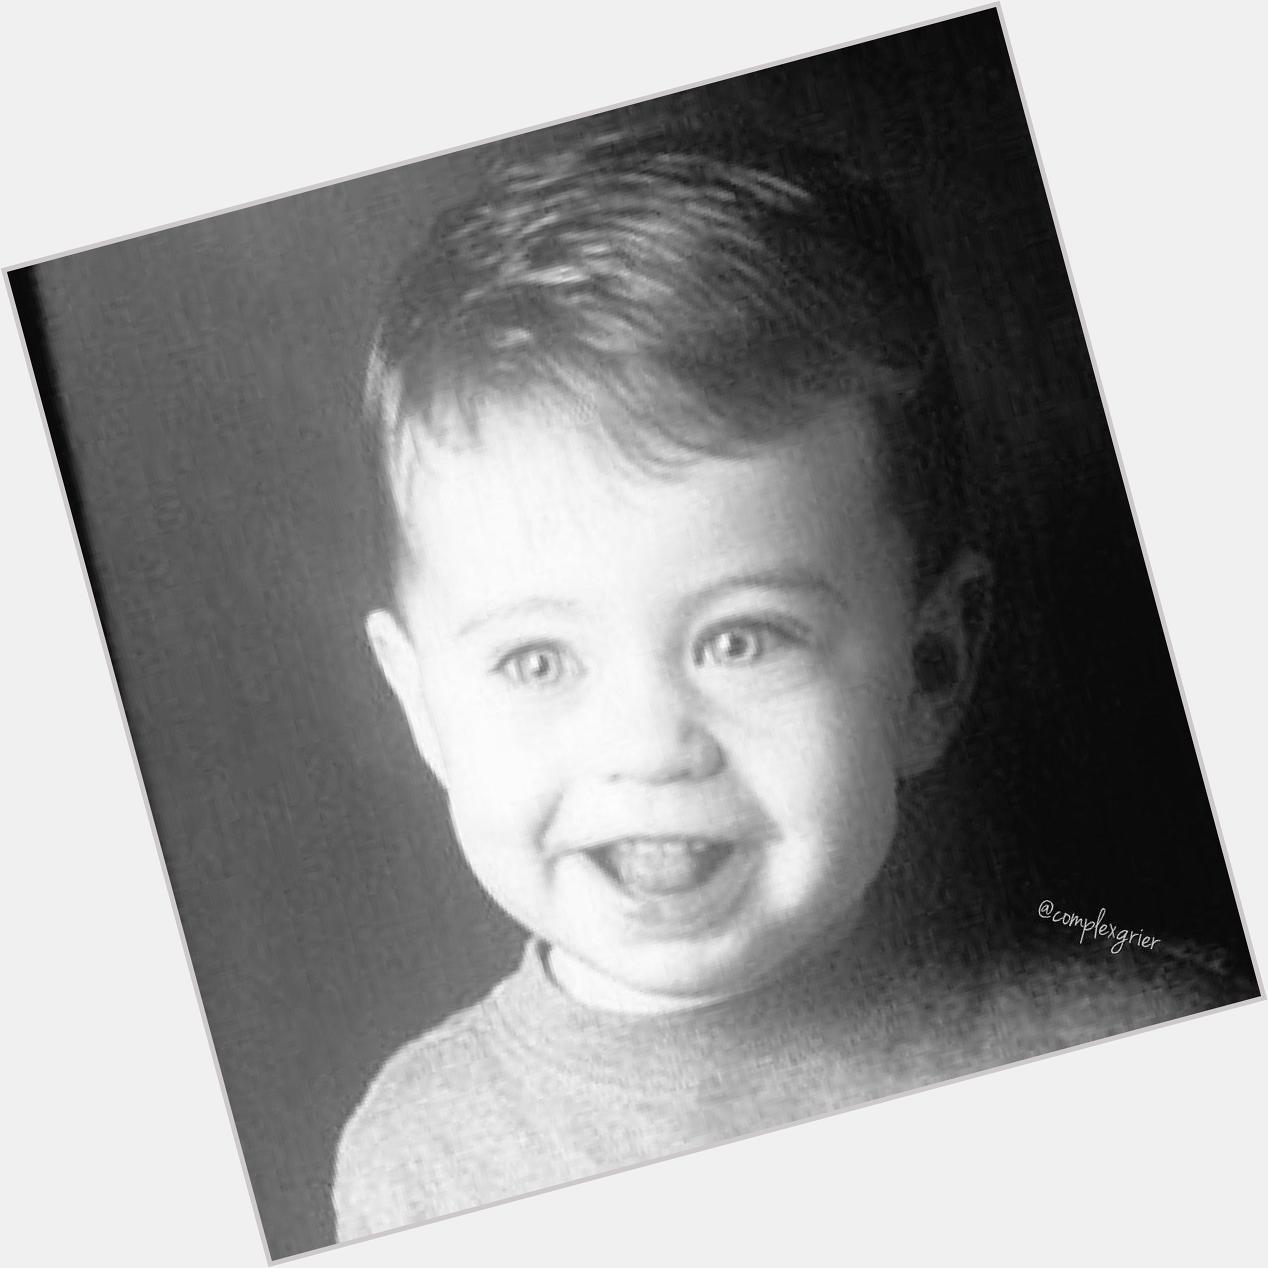   HAPPY BIRTHDAY NASH GRIER                        I DON\T WANT YOU TO GROW UP 300x 